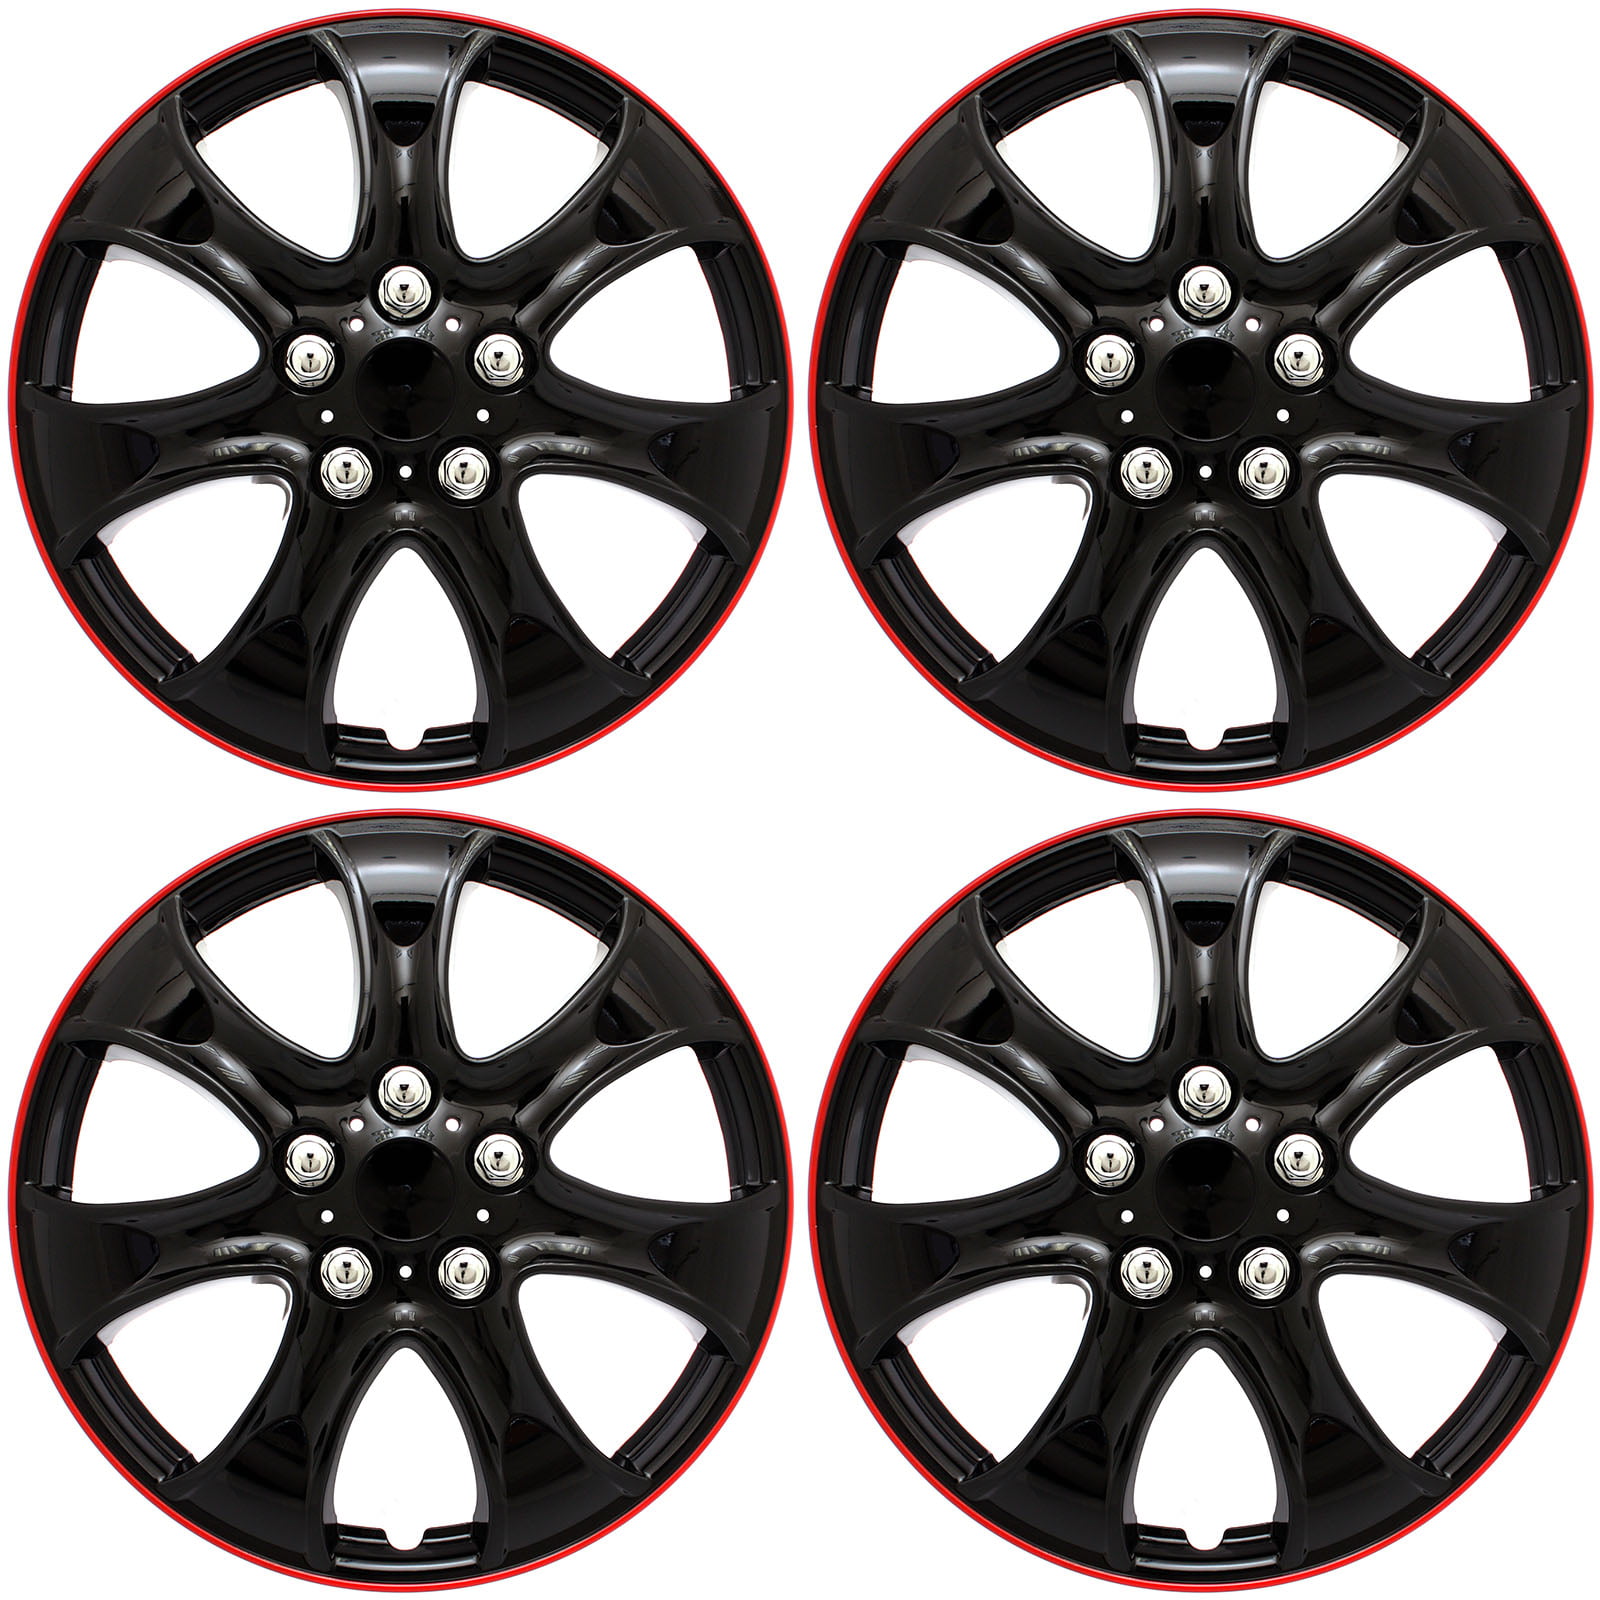 SET OF 4 x 15 INCH RED AND BLACK SPORTS WHEEL TRIMS COVER HUB CAPS 15" UNIVERSAL 